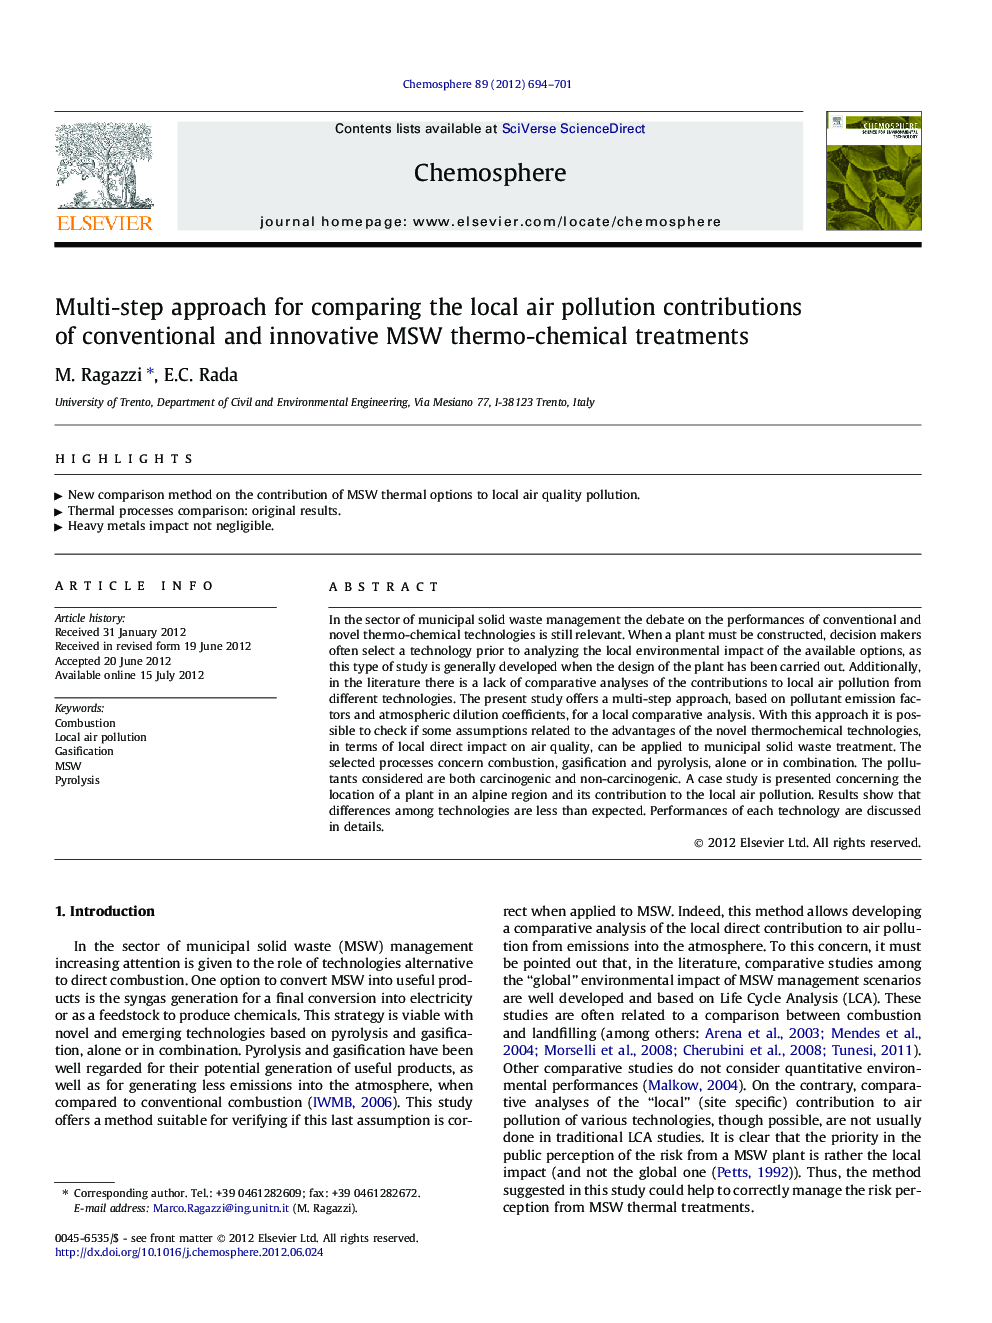 Multi-step approach for comparing the local air pollution contributions of conventional and innovative MSW thermo-chemical treatments